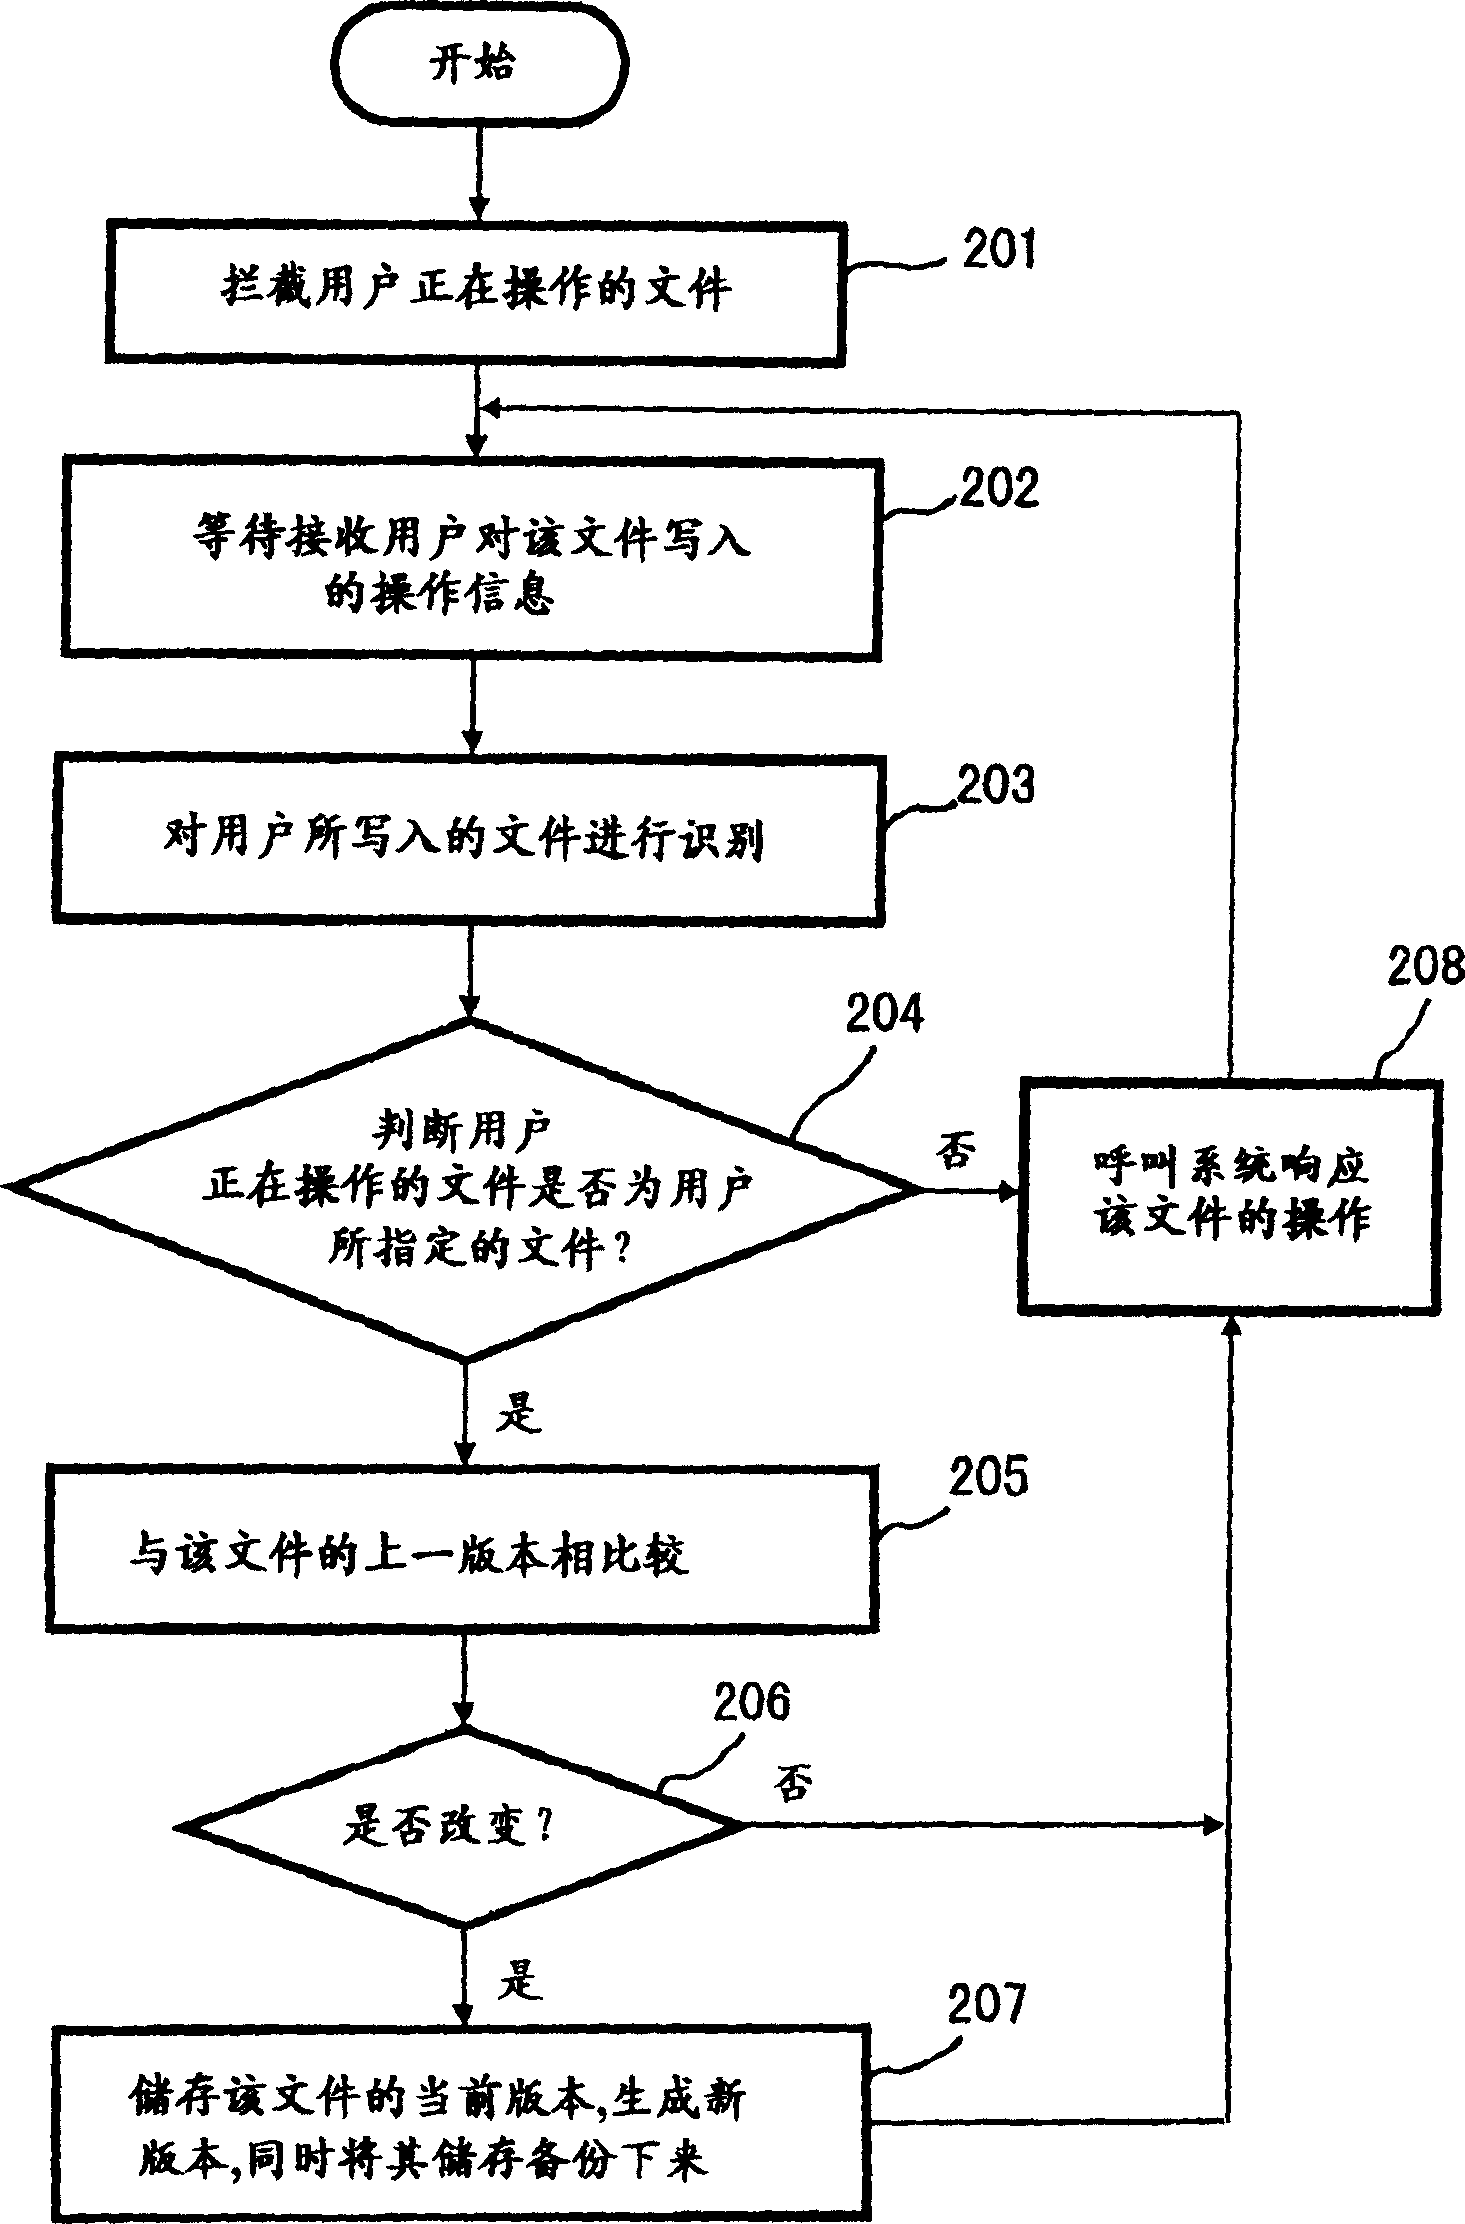 Method for instantaneous generation of file version